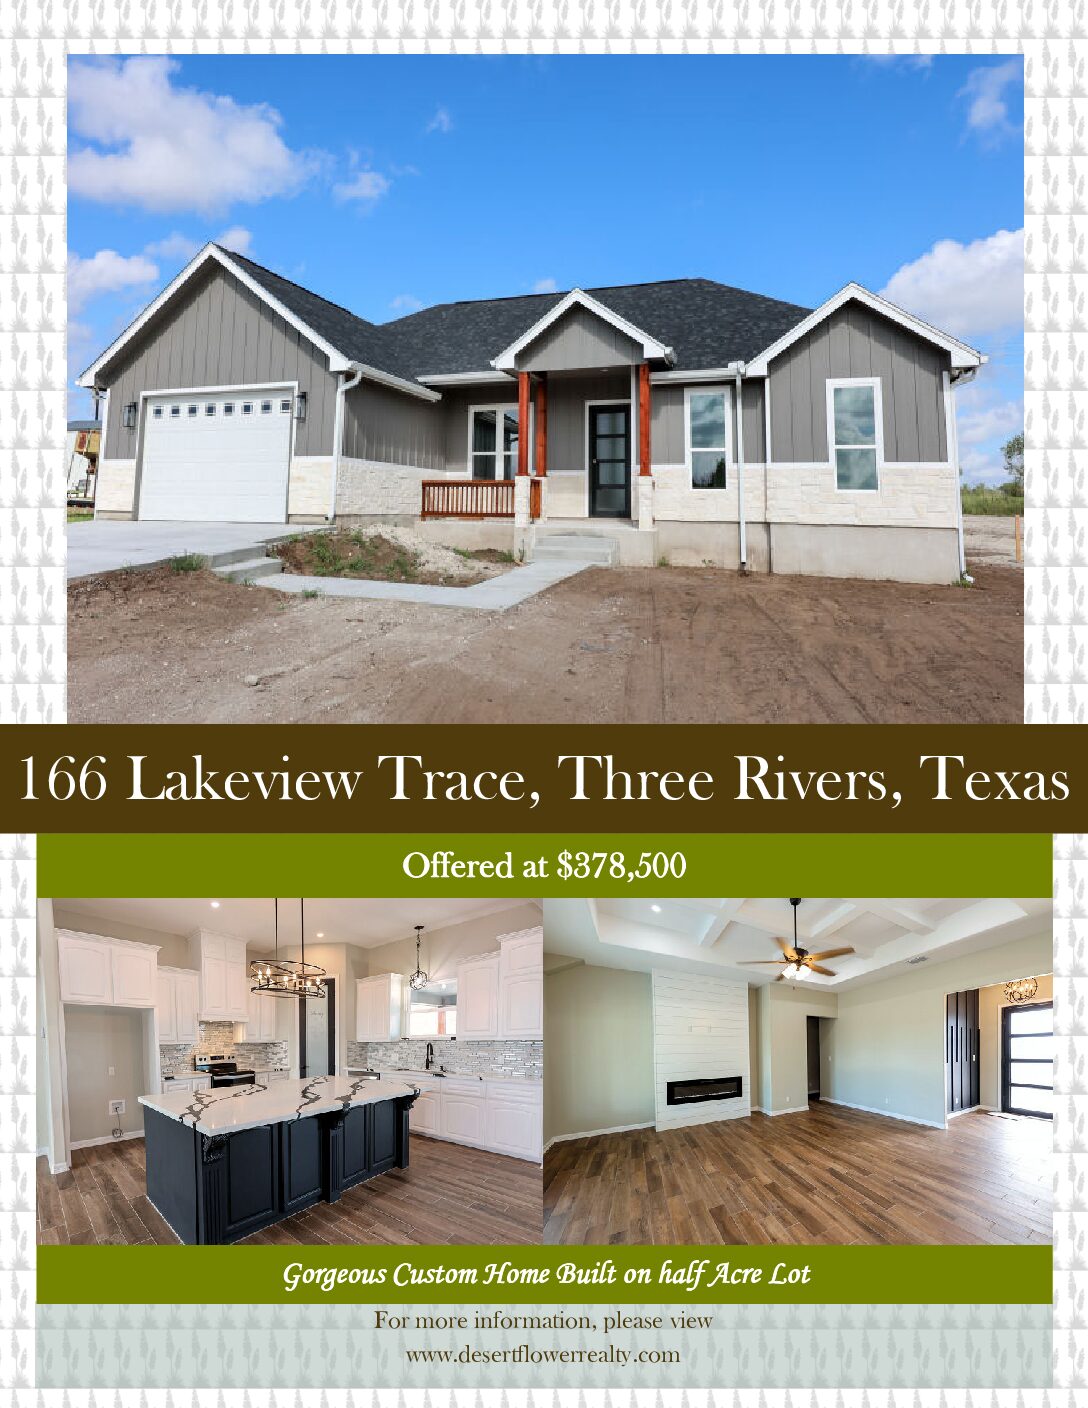 166 Lakeview Trace, Three Rivers Brochure